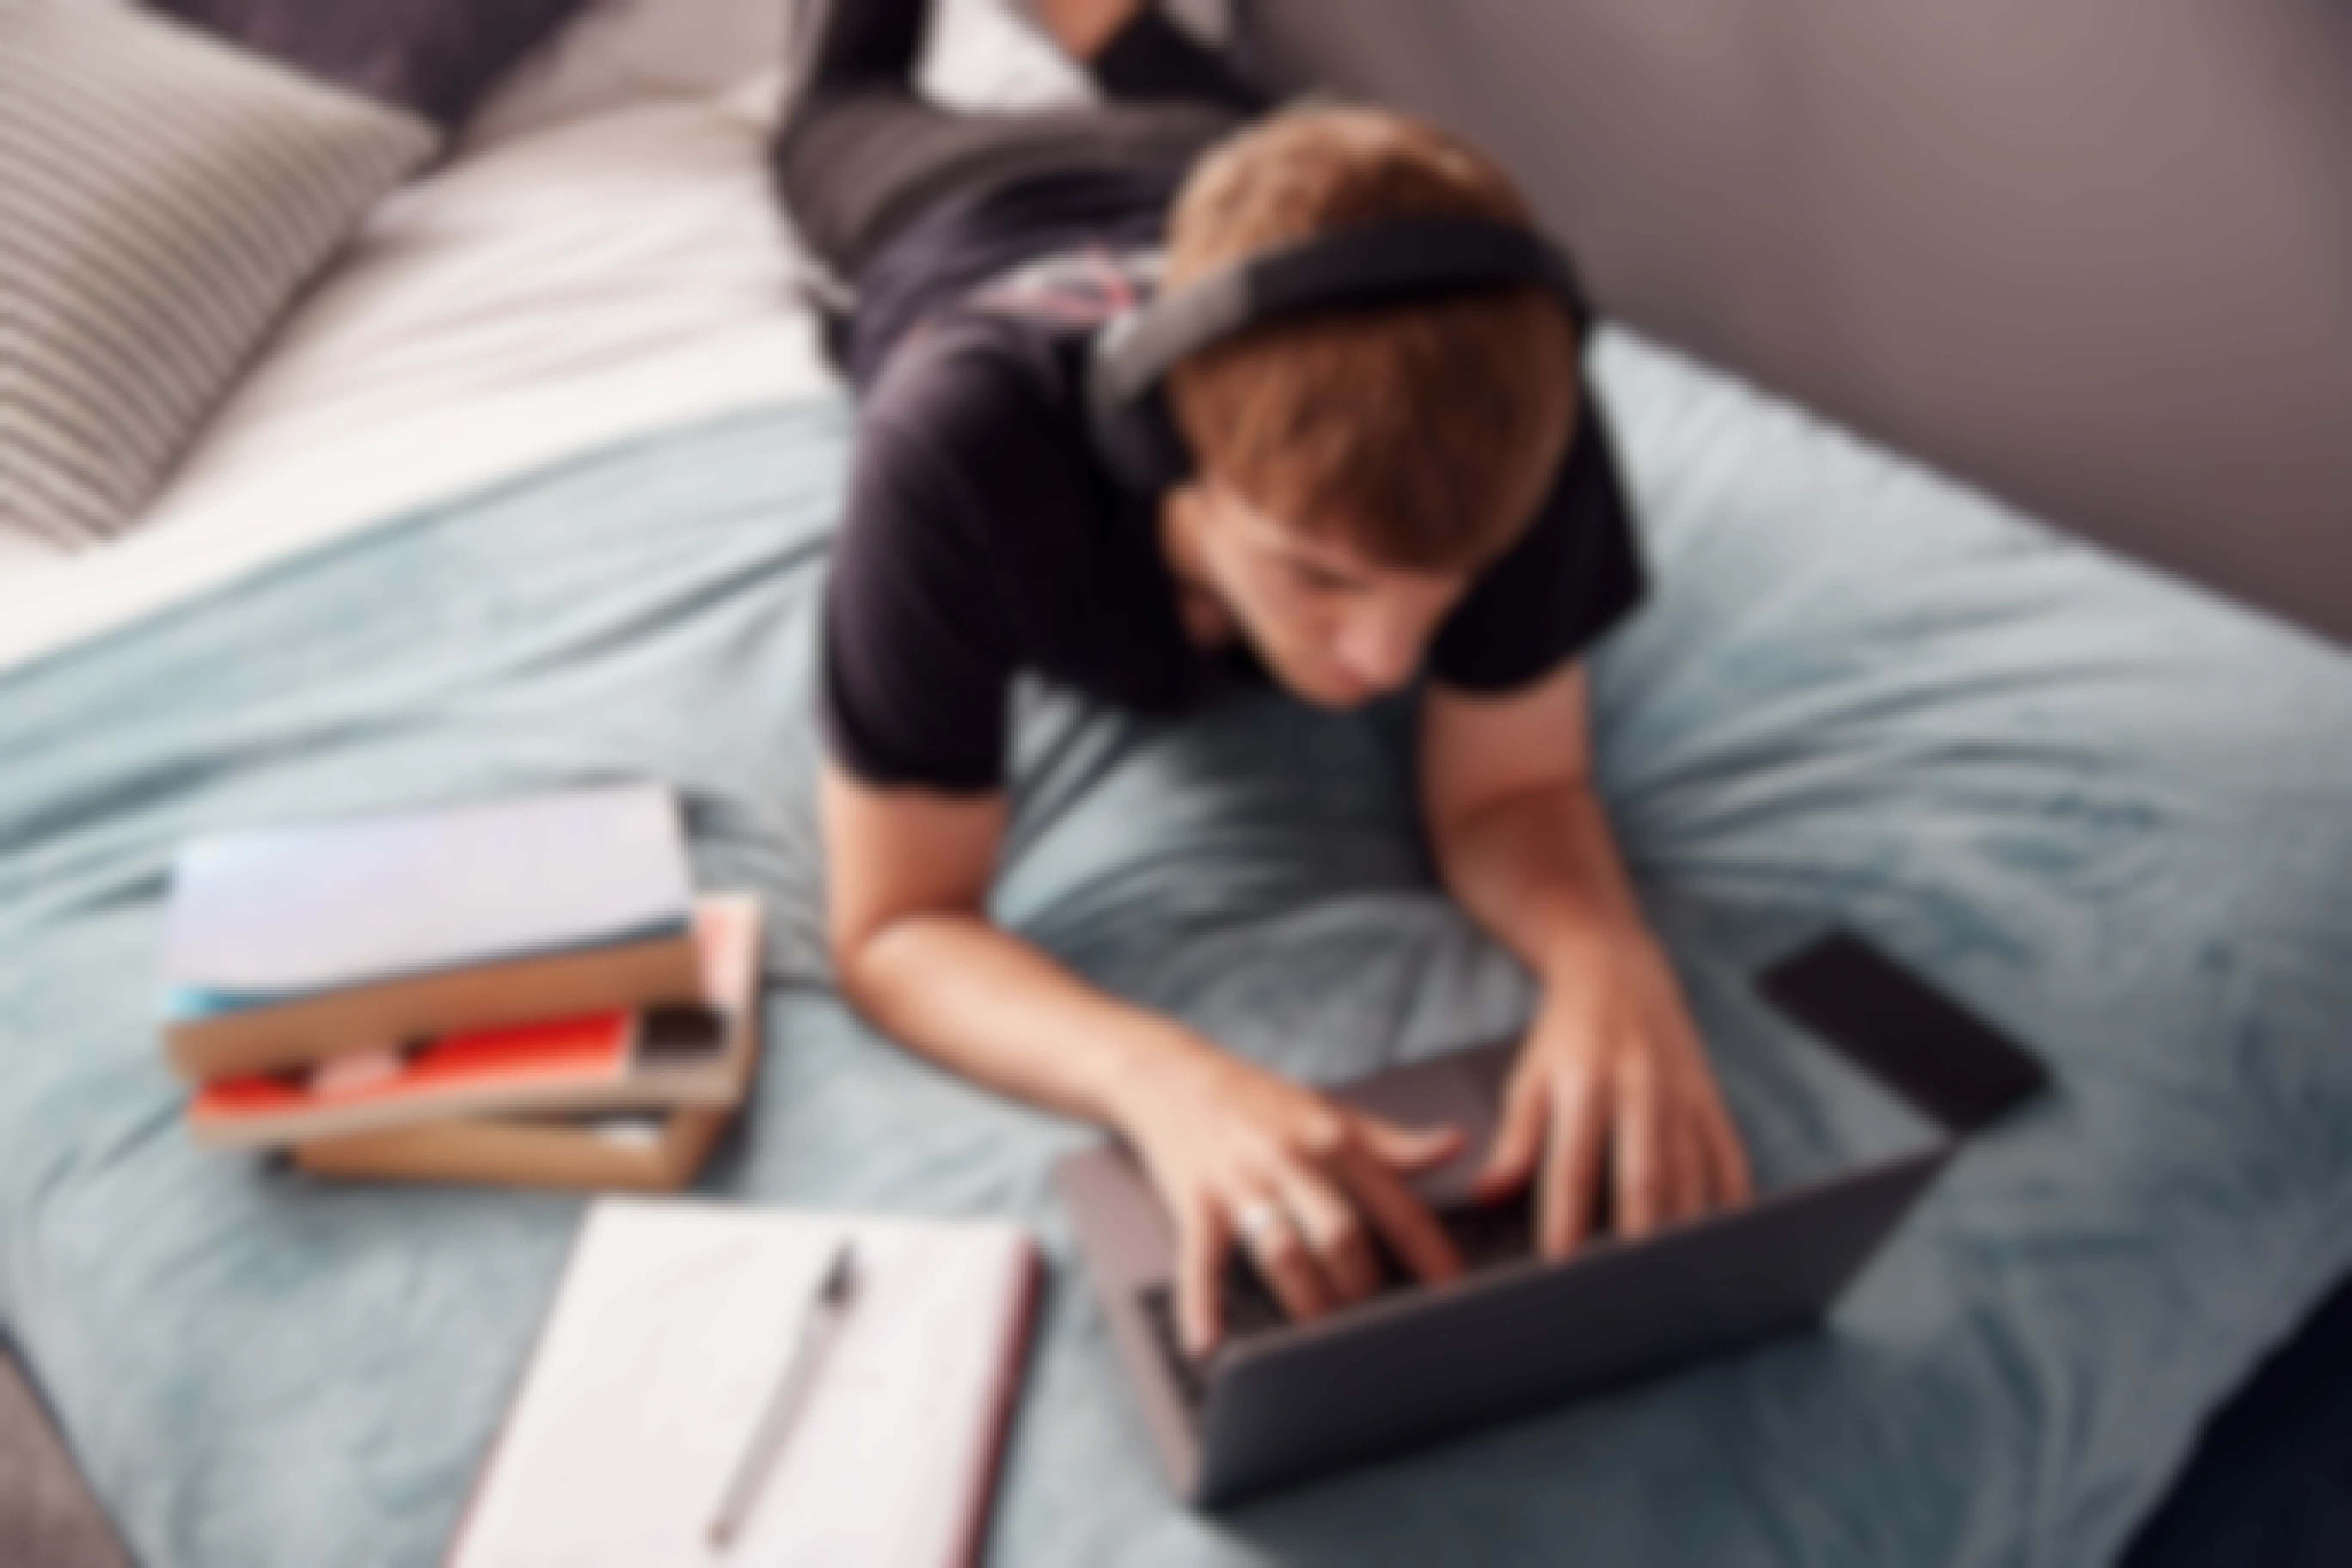 A student with headphones lying down, using a laptop on a bed next to some books, a notebook, and a phone.